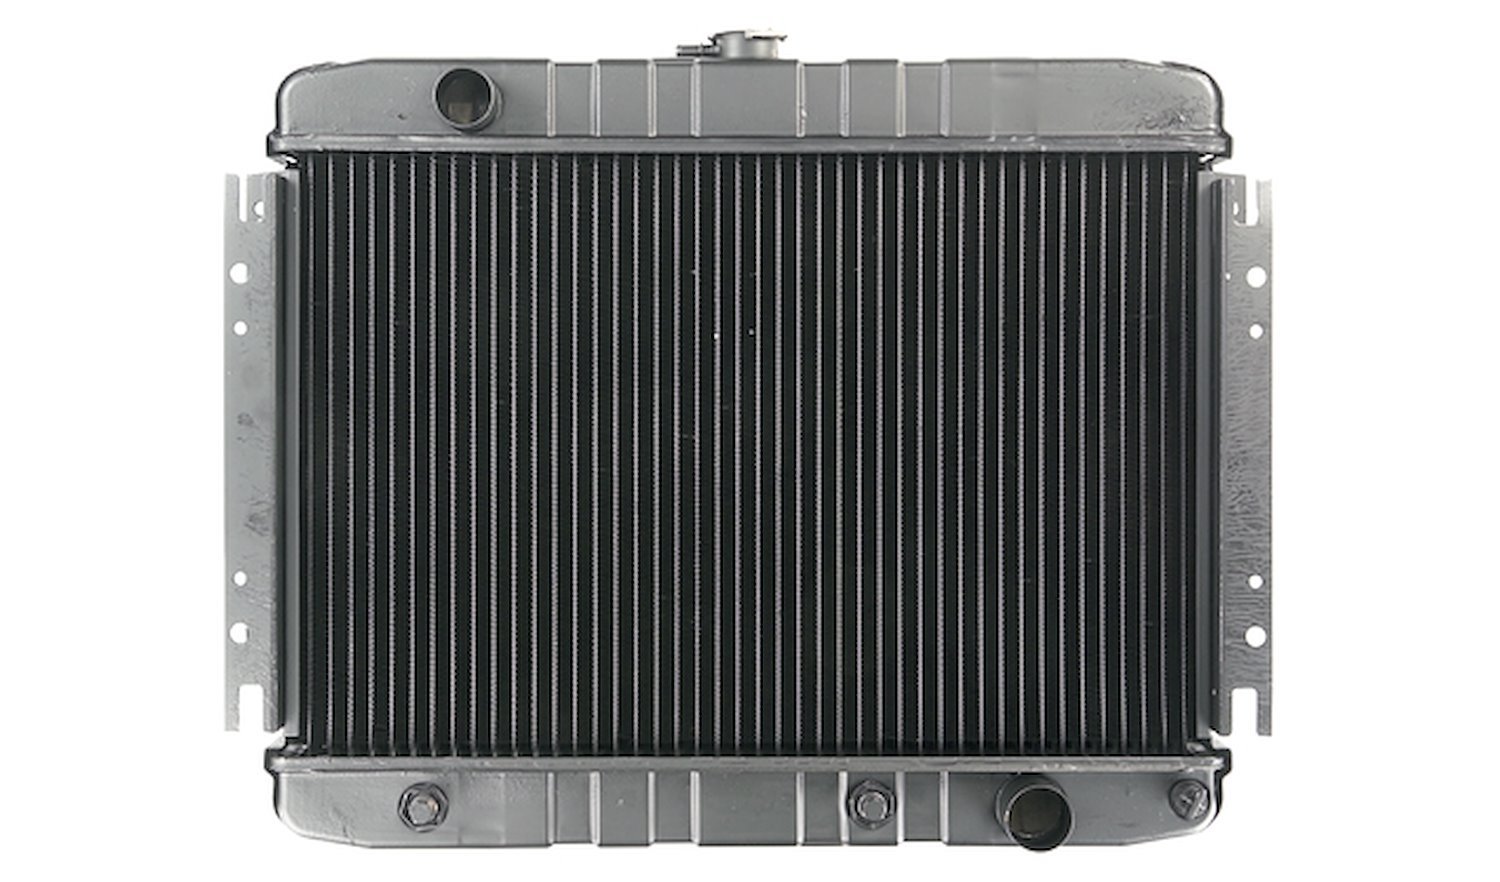 Replacement Radiator for 1966-1968 Chevrolet Impala [3-Row]